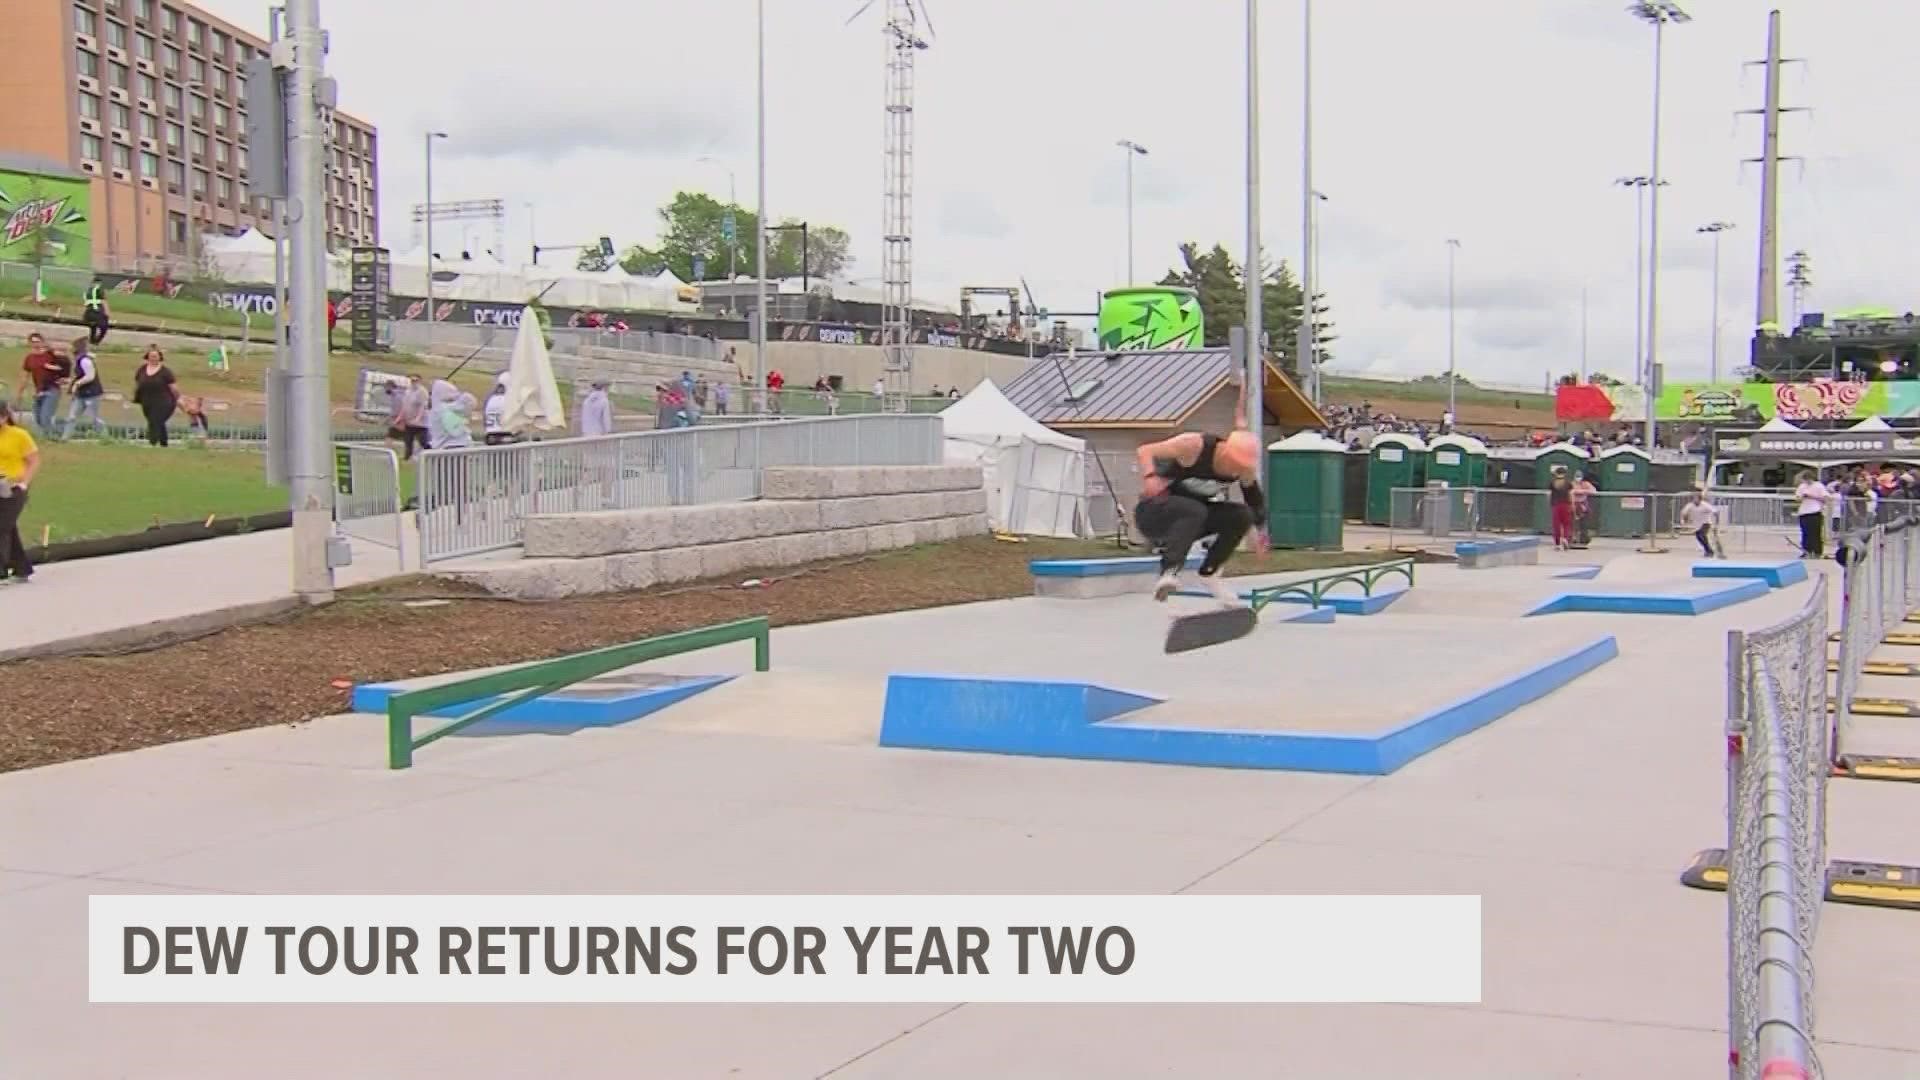 The skateboarding competition will take place at Lauridsen Skatepark in downtown Des Moines Friday and Saturday.